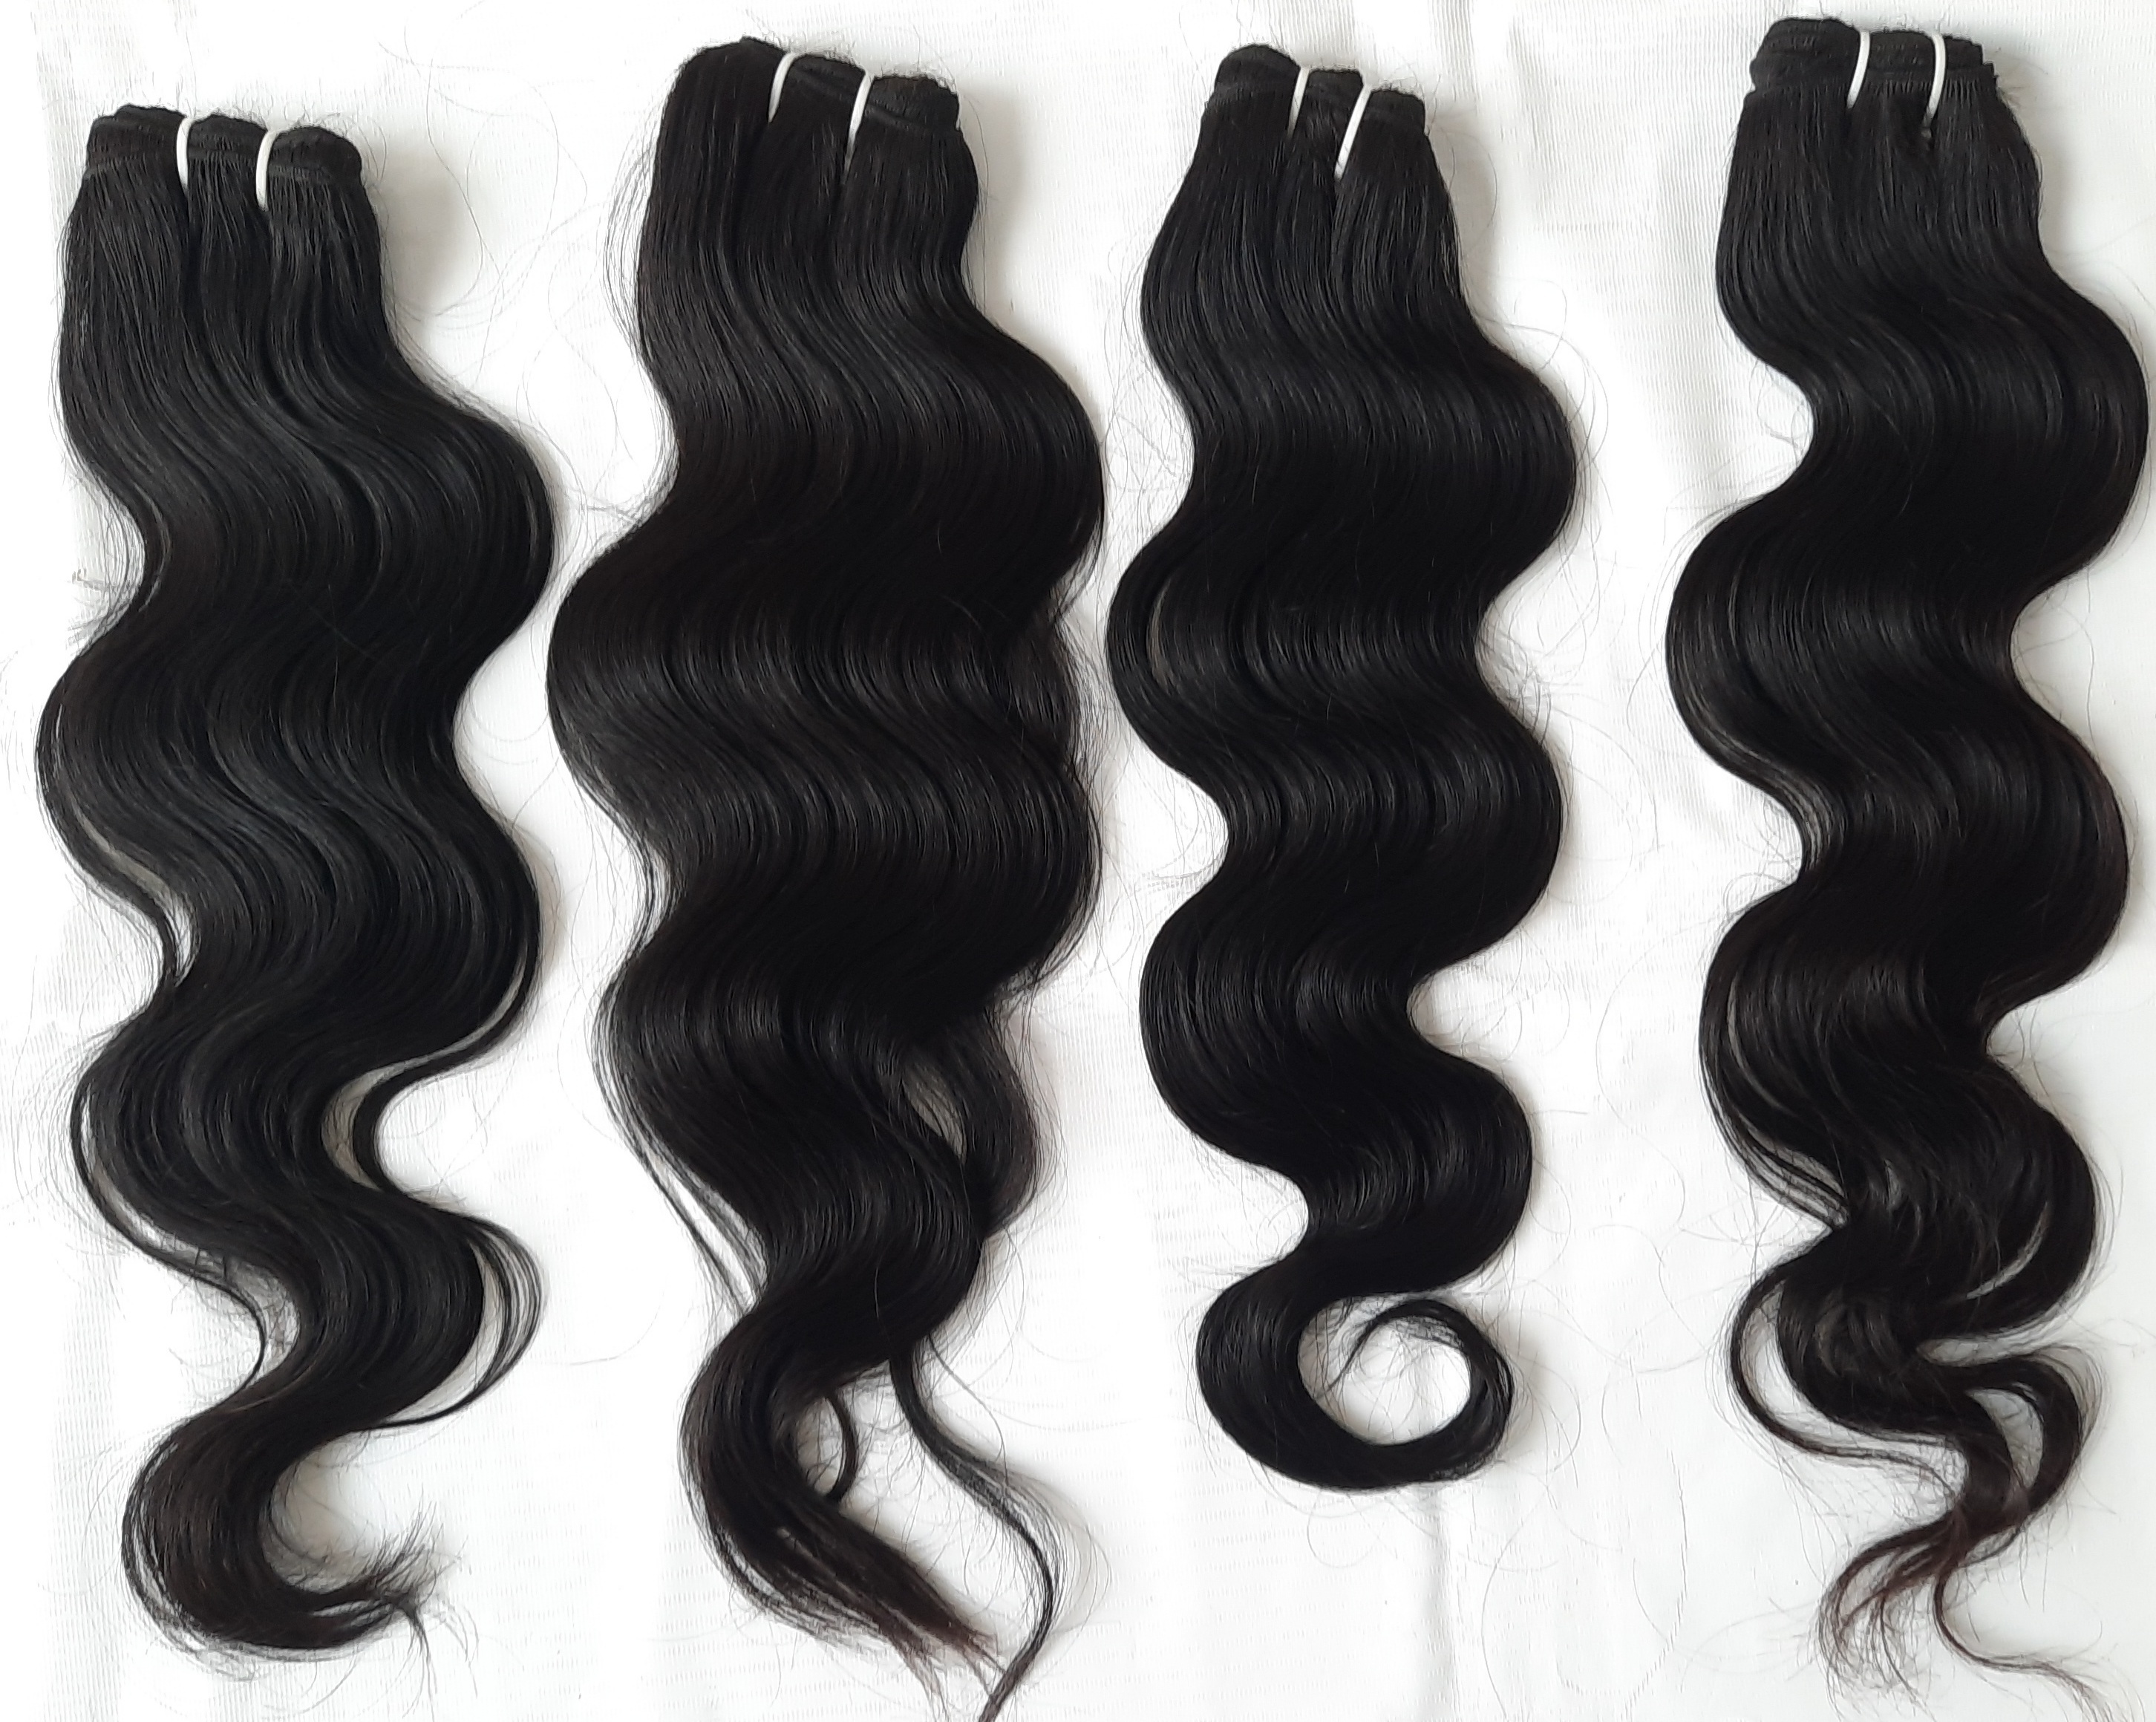 Body Wave Hair Weave Wefts in natural color